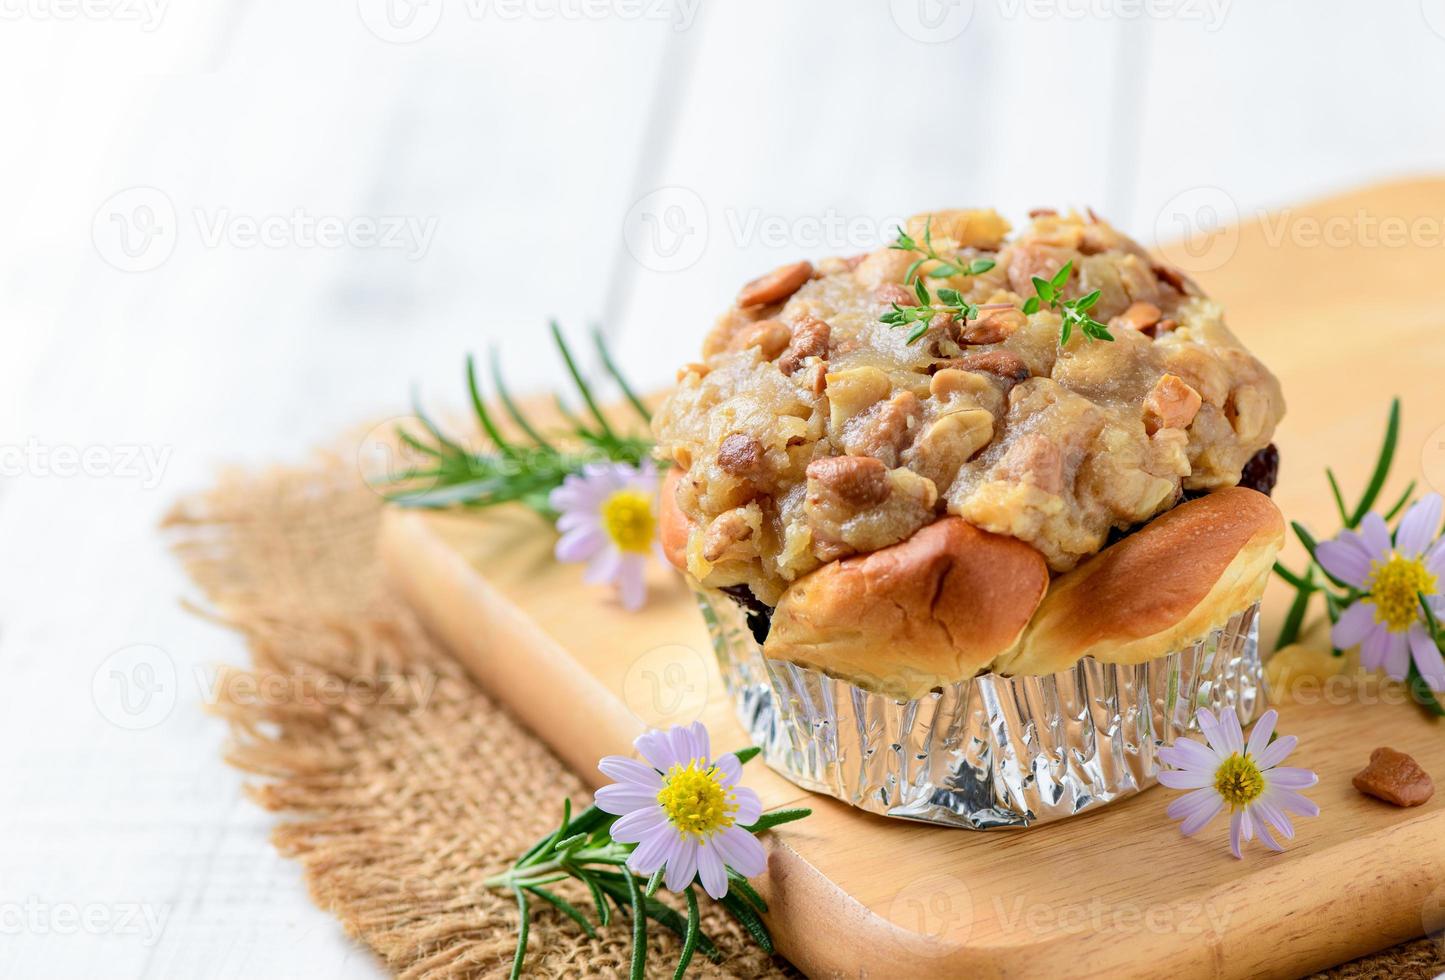 Butterscotch Bread with nuts on top on wood plated photo